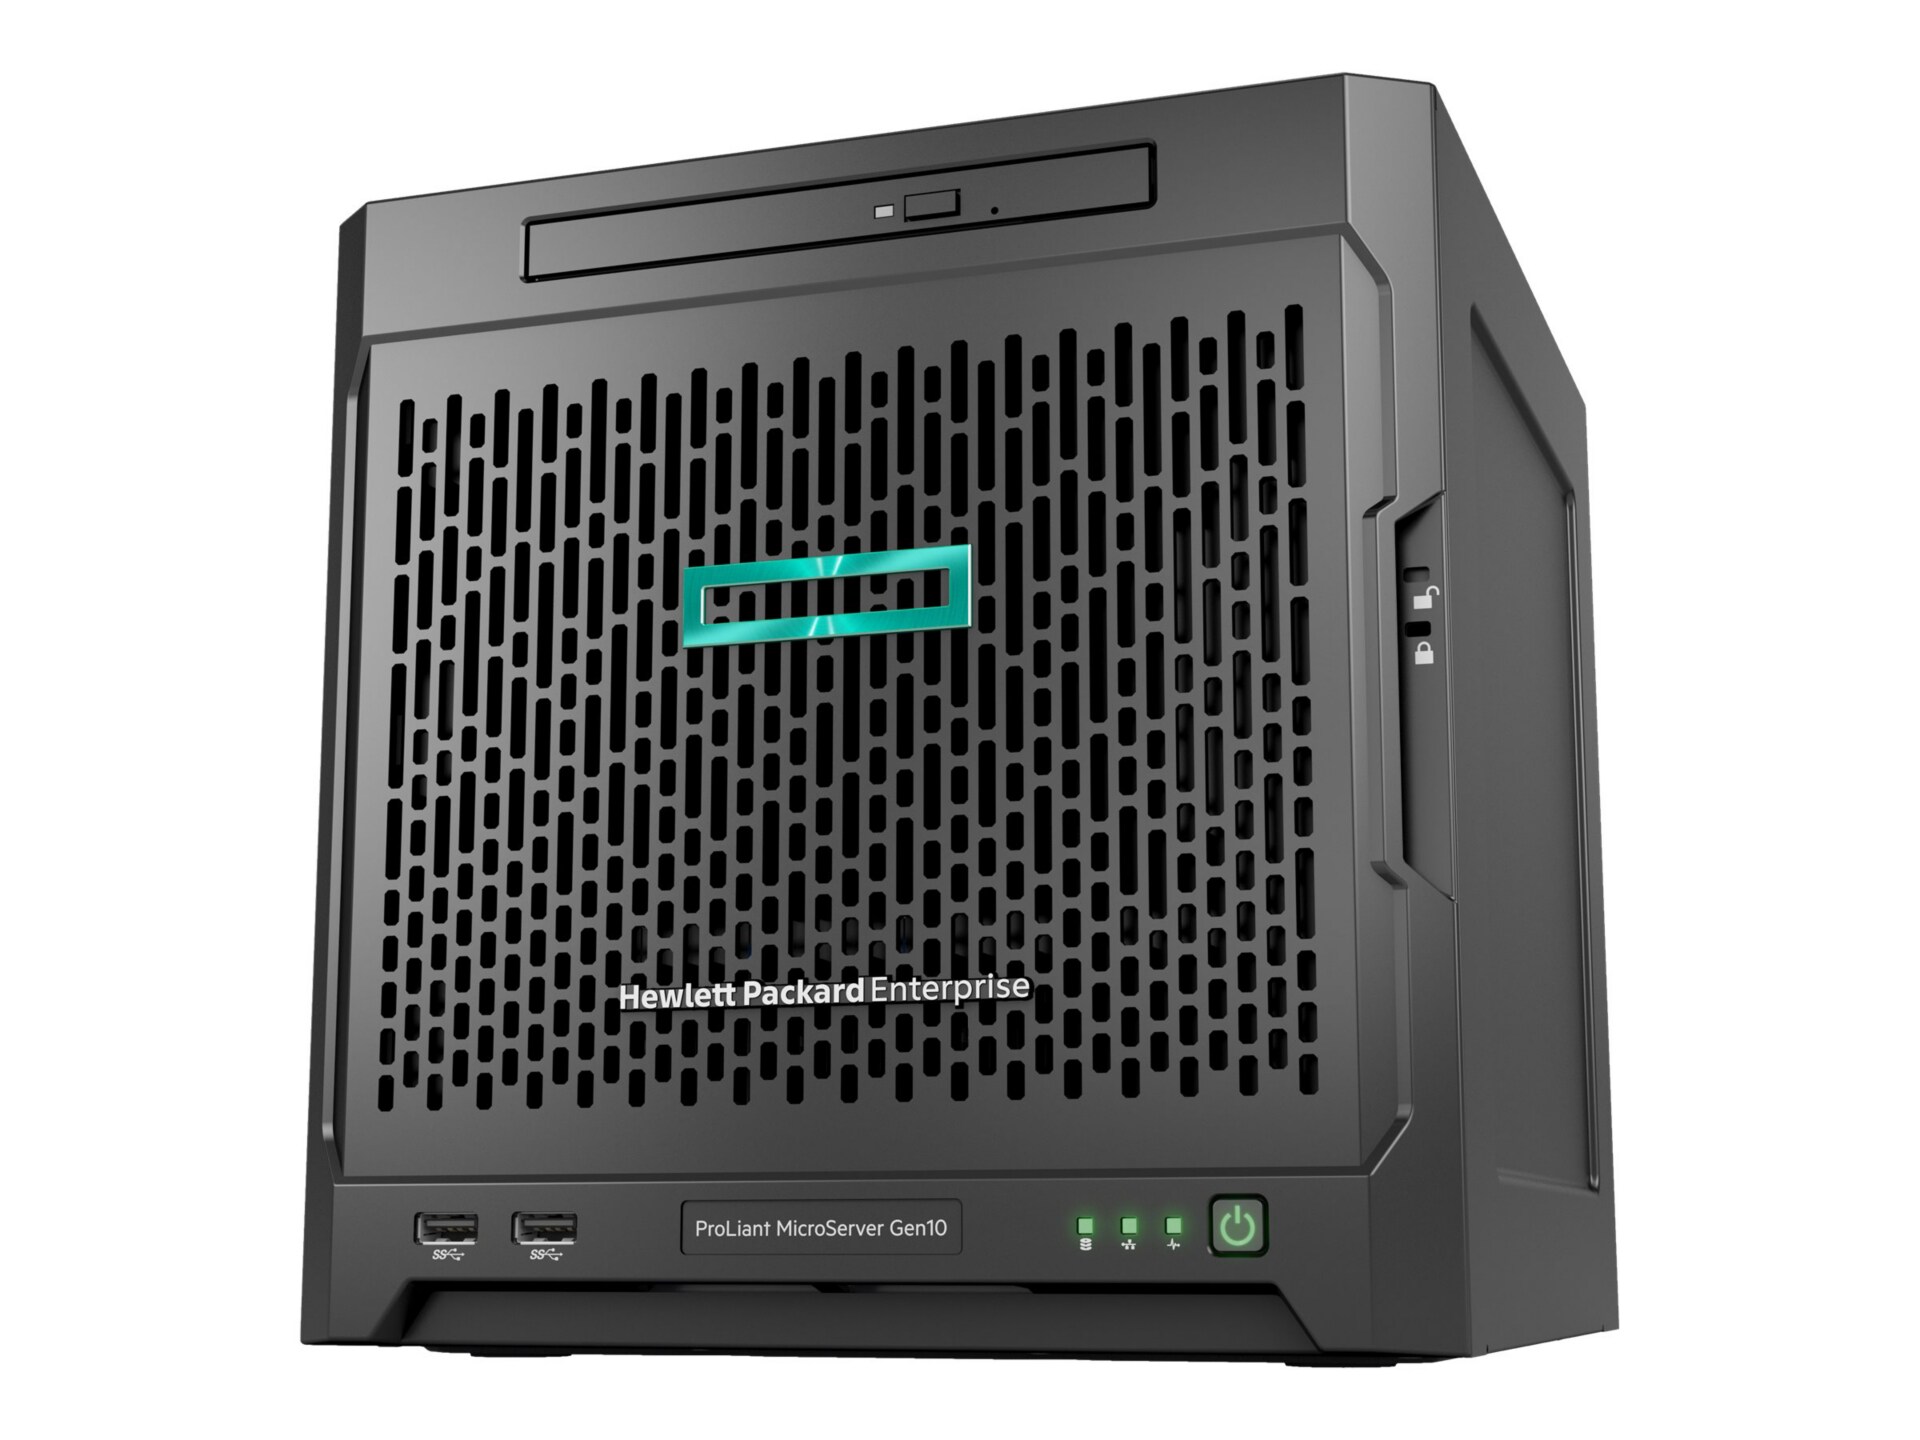 HPE ProLiant MicroServer Gen10 - ultra micro tower - Opteron X3421 2.1 GHz - 8 GB - 1 TB